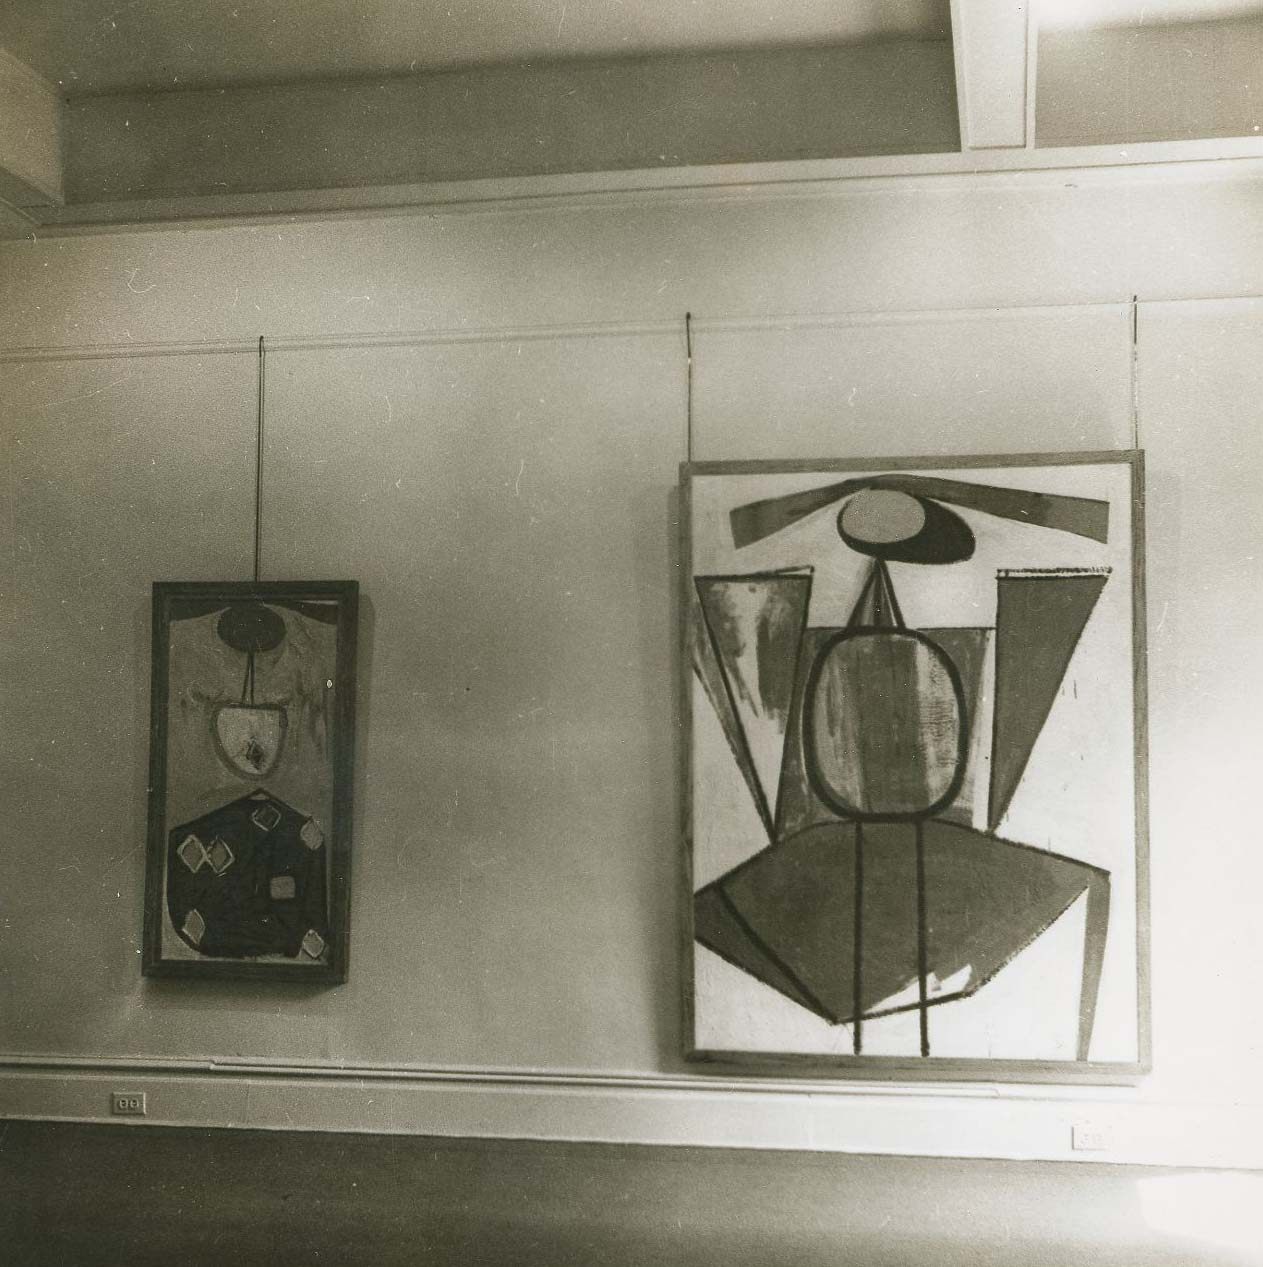 Installation view of Paintings and Collages by Motherwell at the Samuel M. Kootz Gallery, May 1948. From left to right: The Red Skirt and Personage, with Yellow Ochre and White